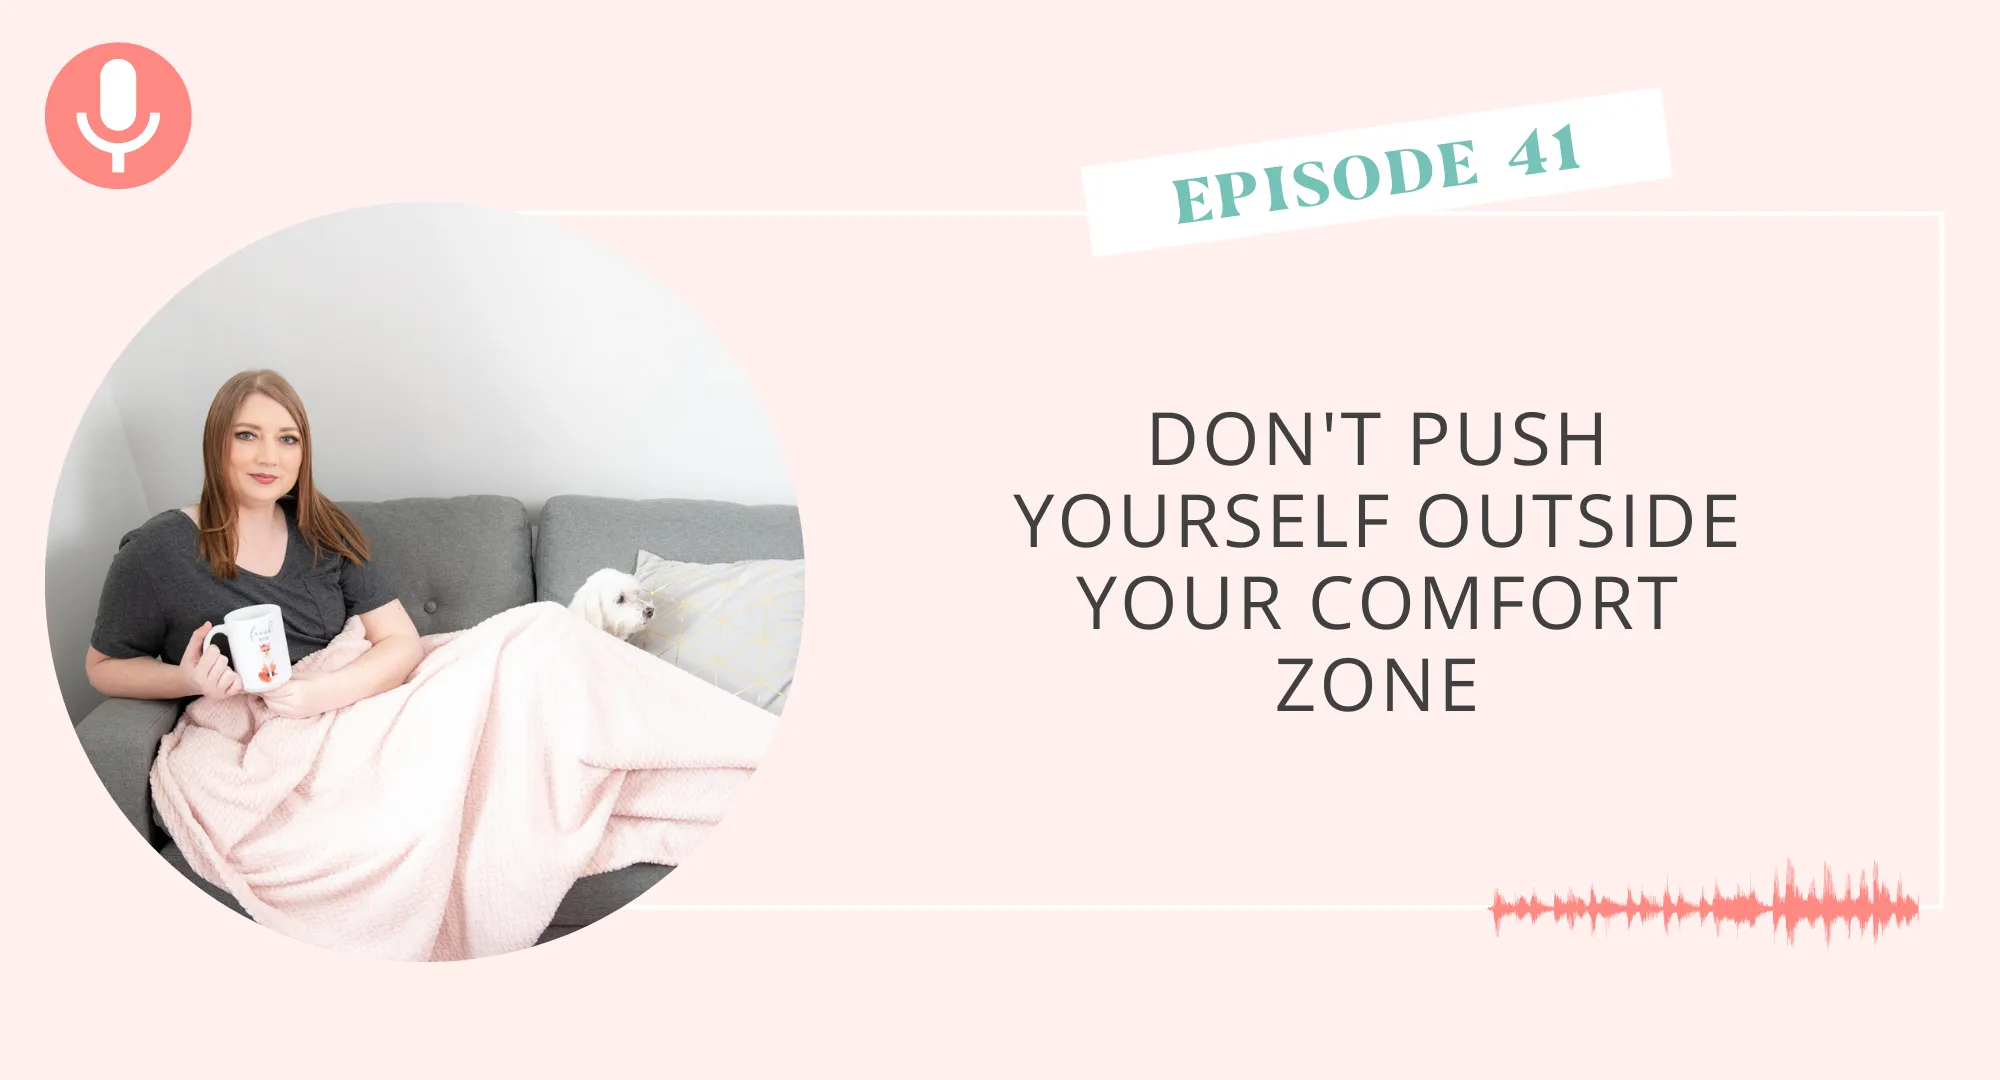 Don’t Push Yourself Outside Your Comfort Zone